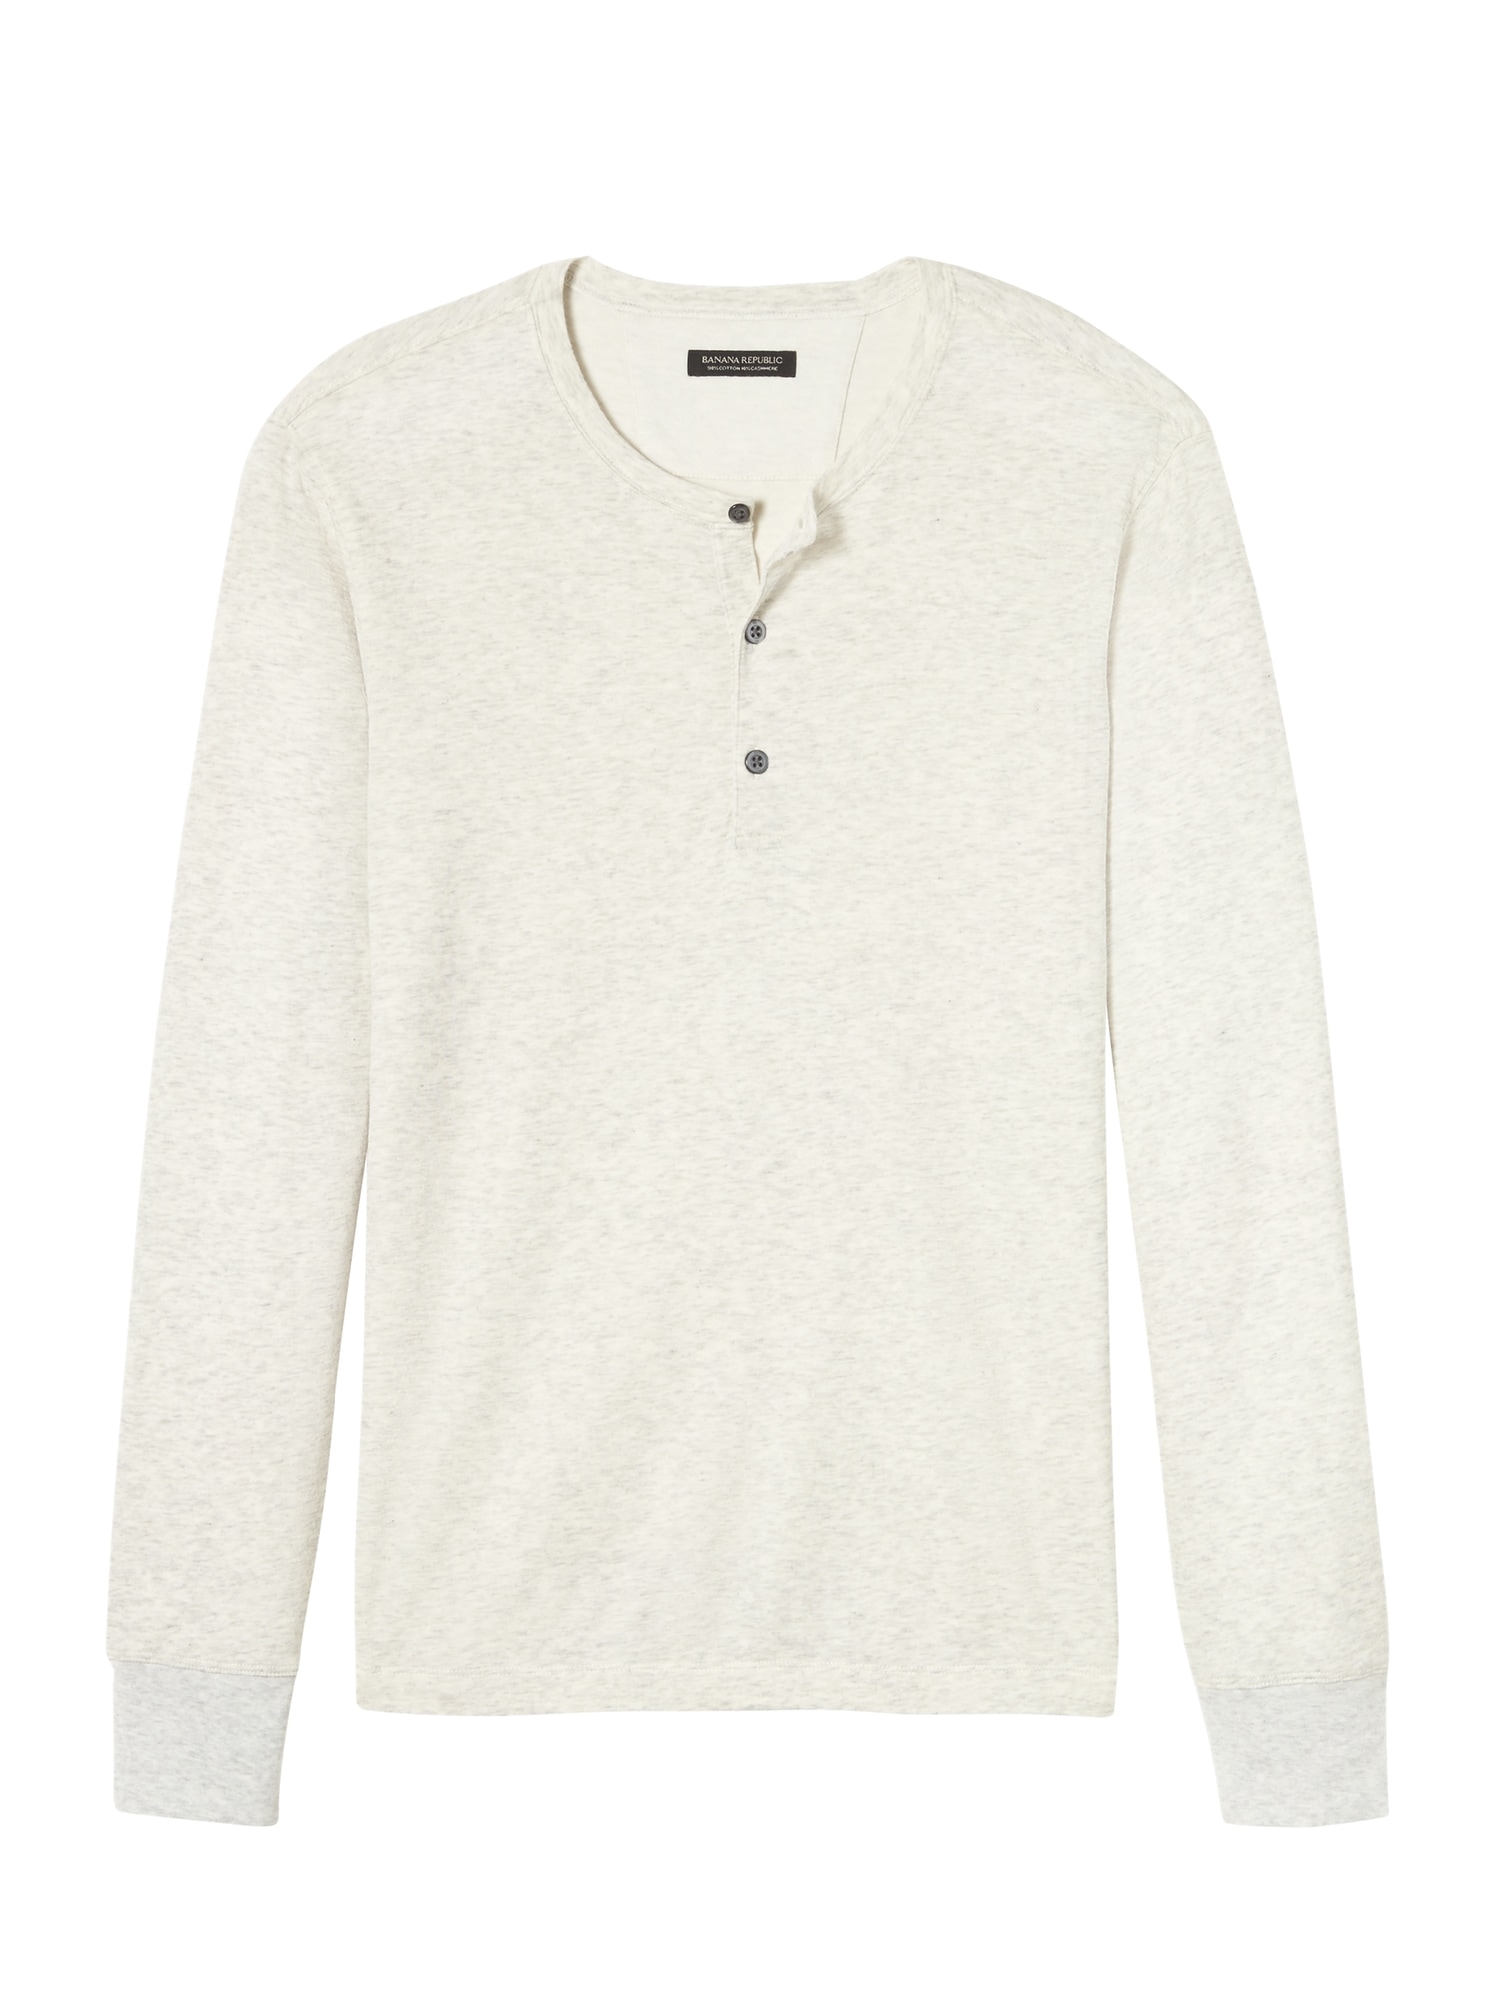 Cotton Cashmere Long-Sleeve Henley